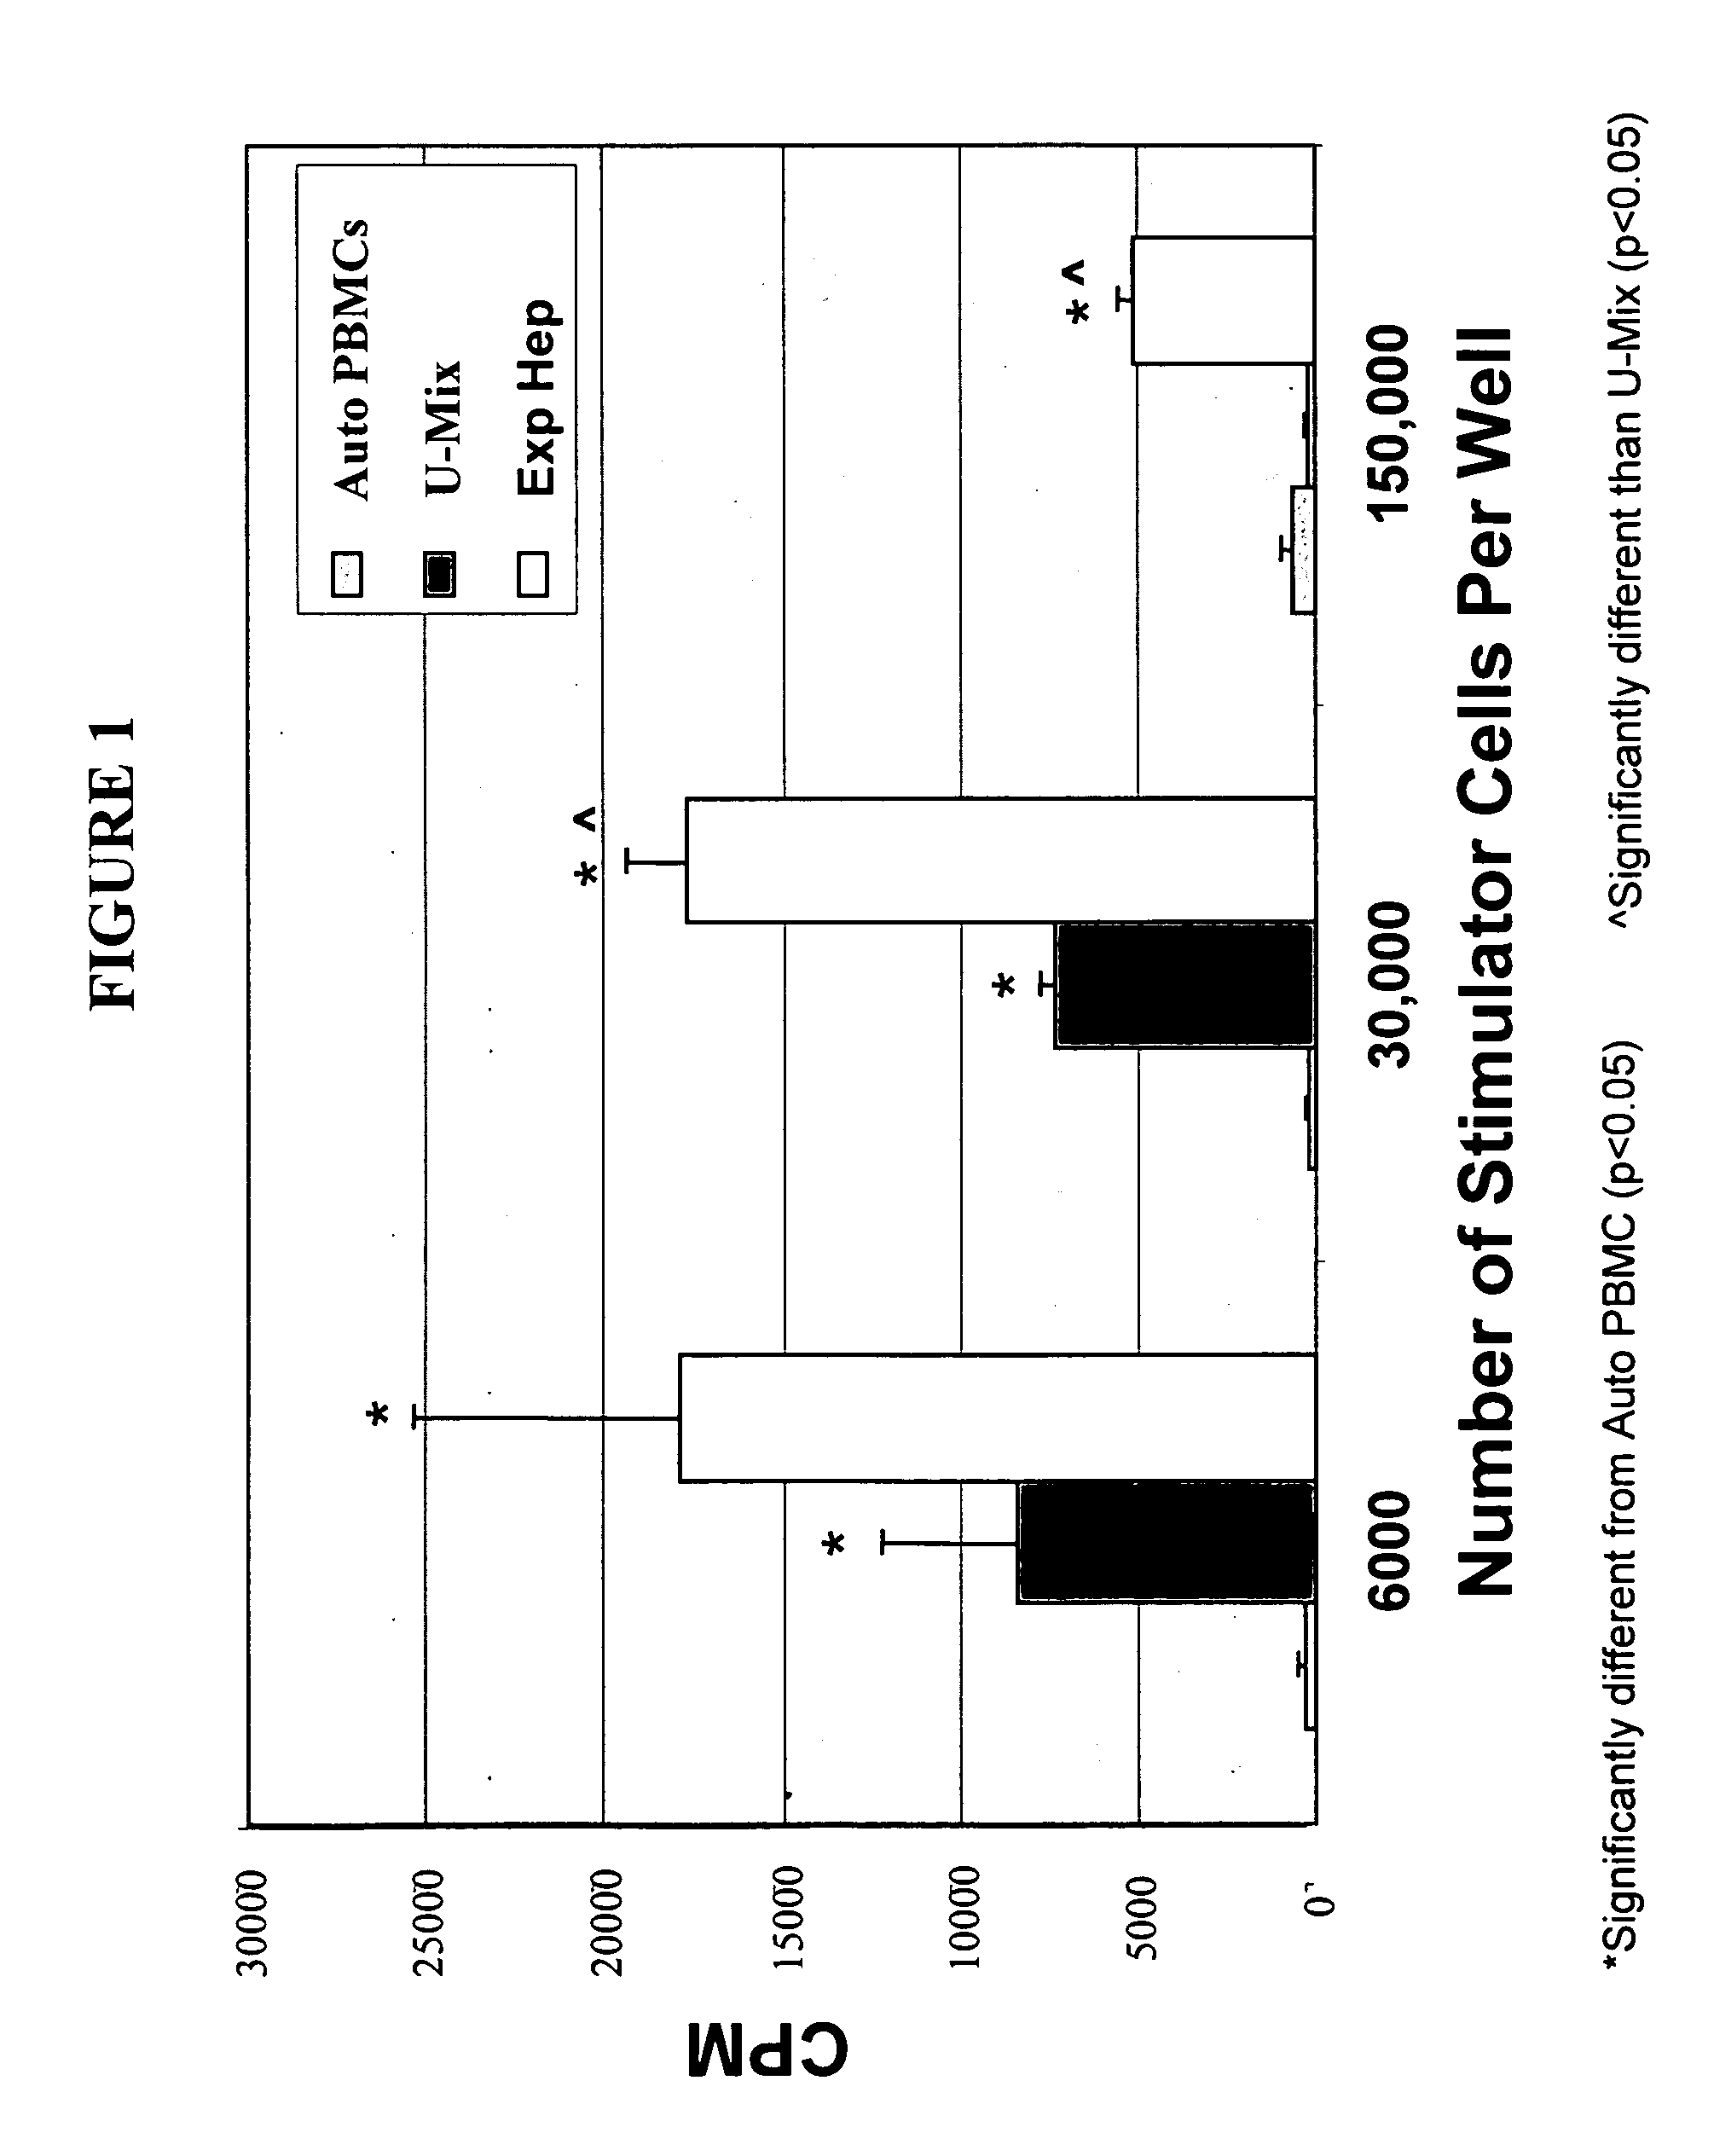 Method of using hepatic progenitors in treating liver dysfunction